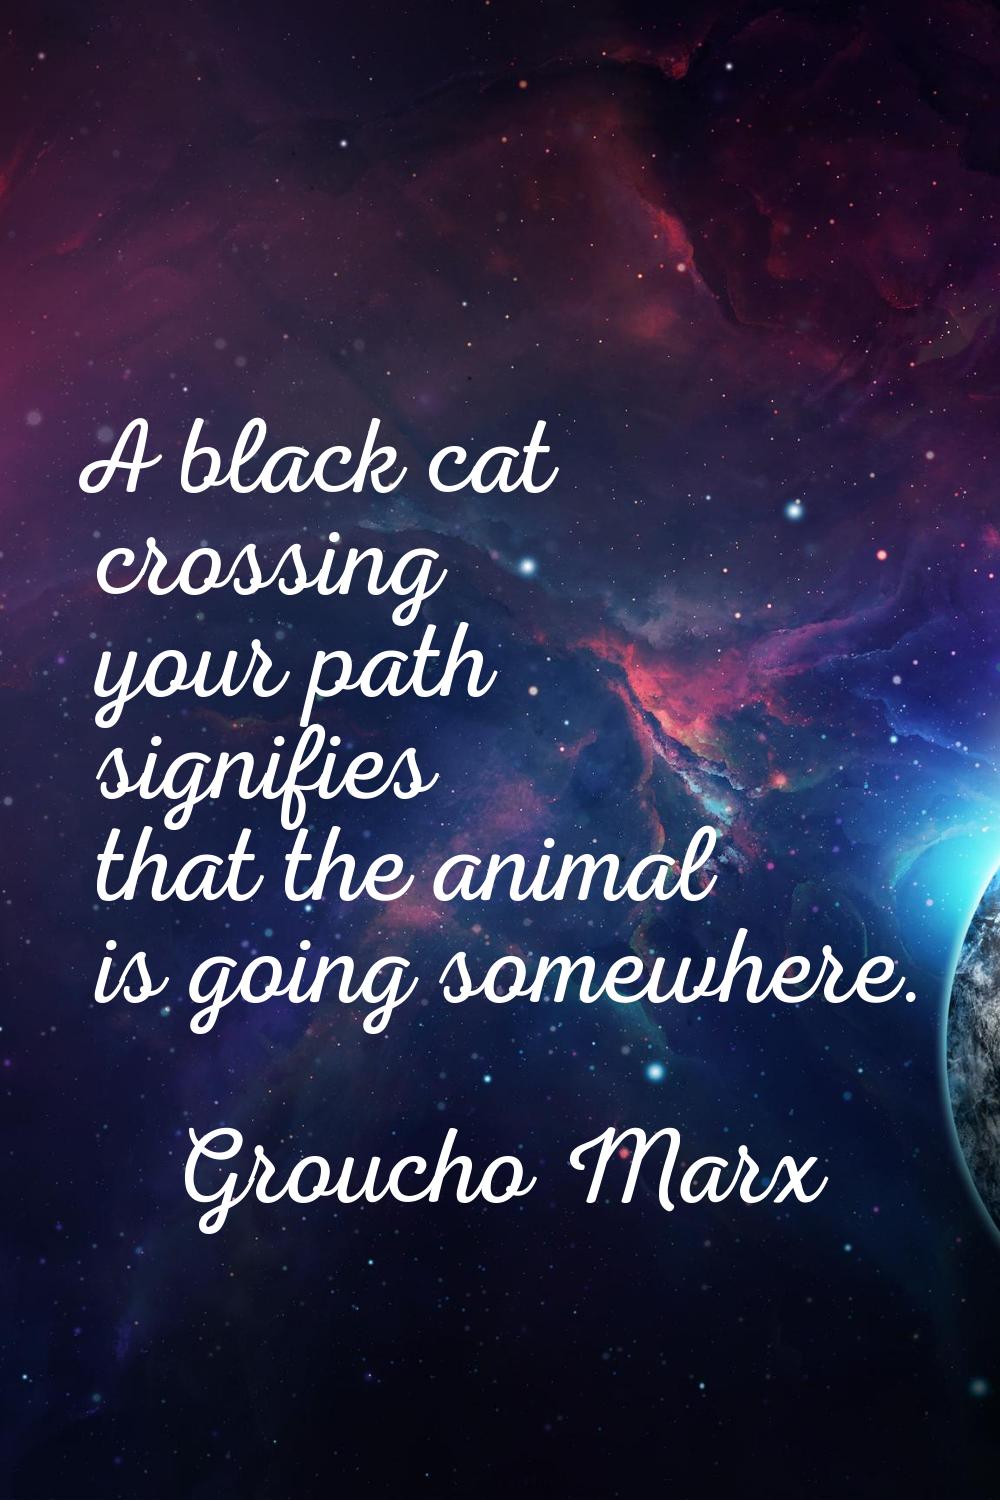 A black cat crossing your path signifies that the animal is going somewhere.